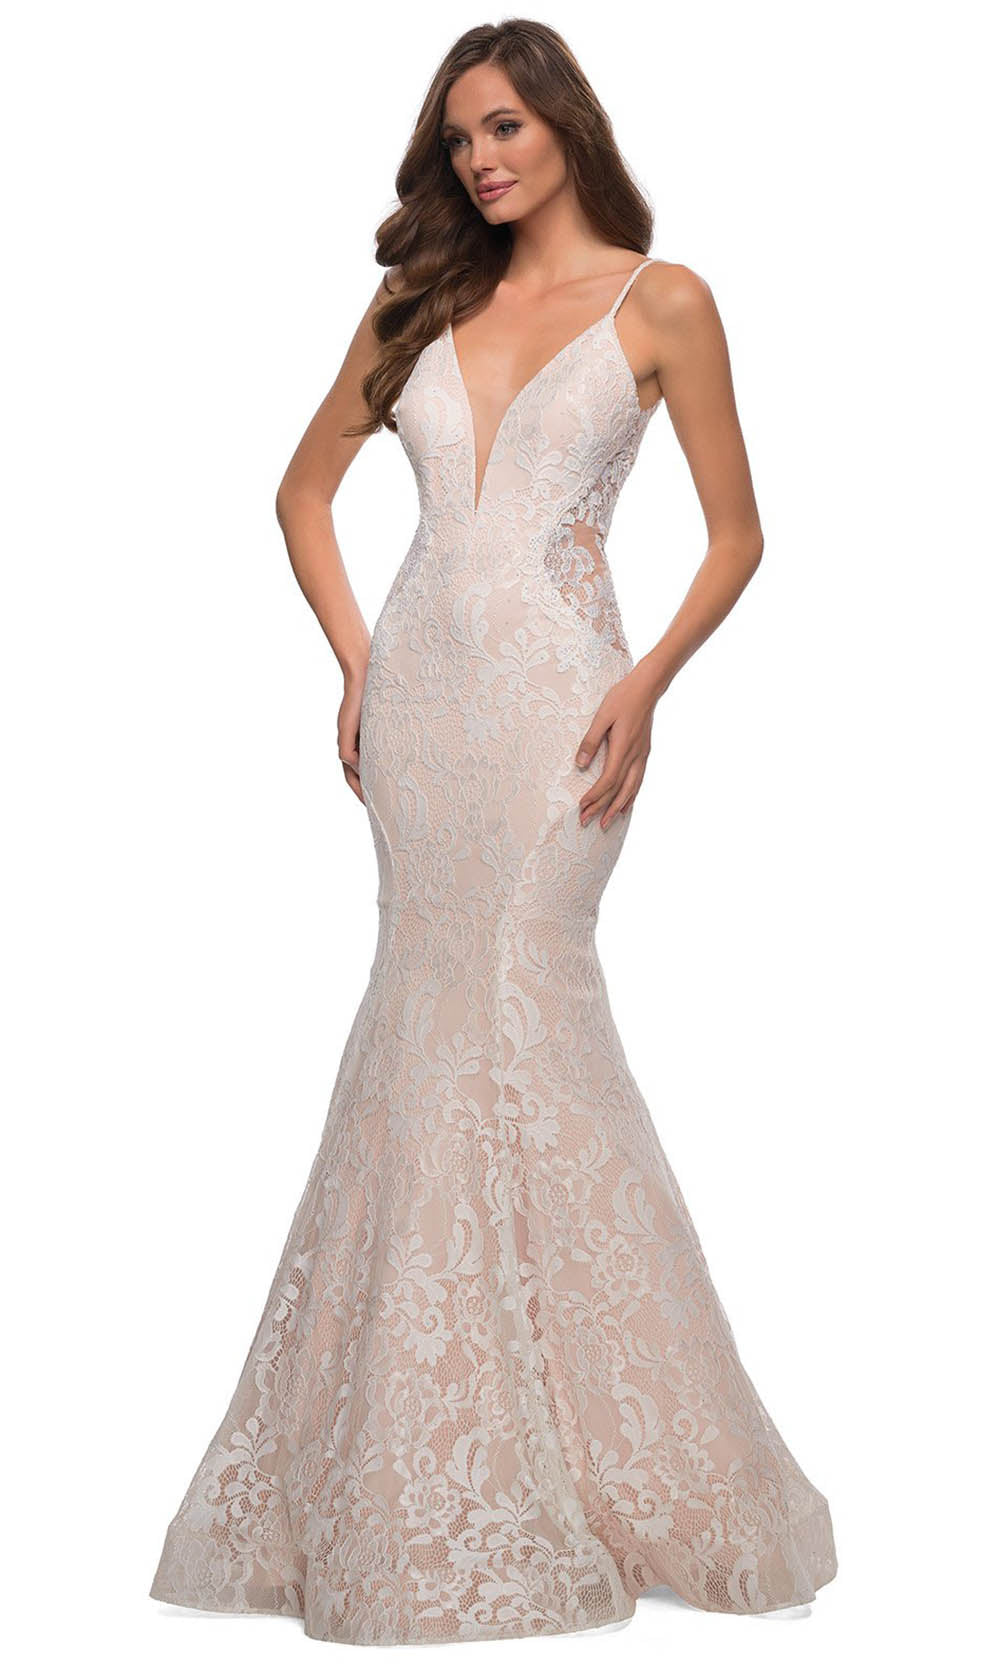 La Femme - 28355 Sparkly Lace Illusion Bodice Mermaid Gown In White & Ivory